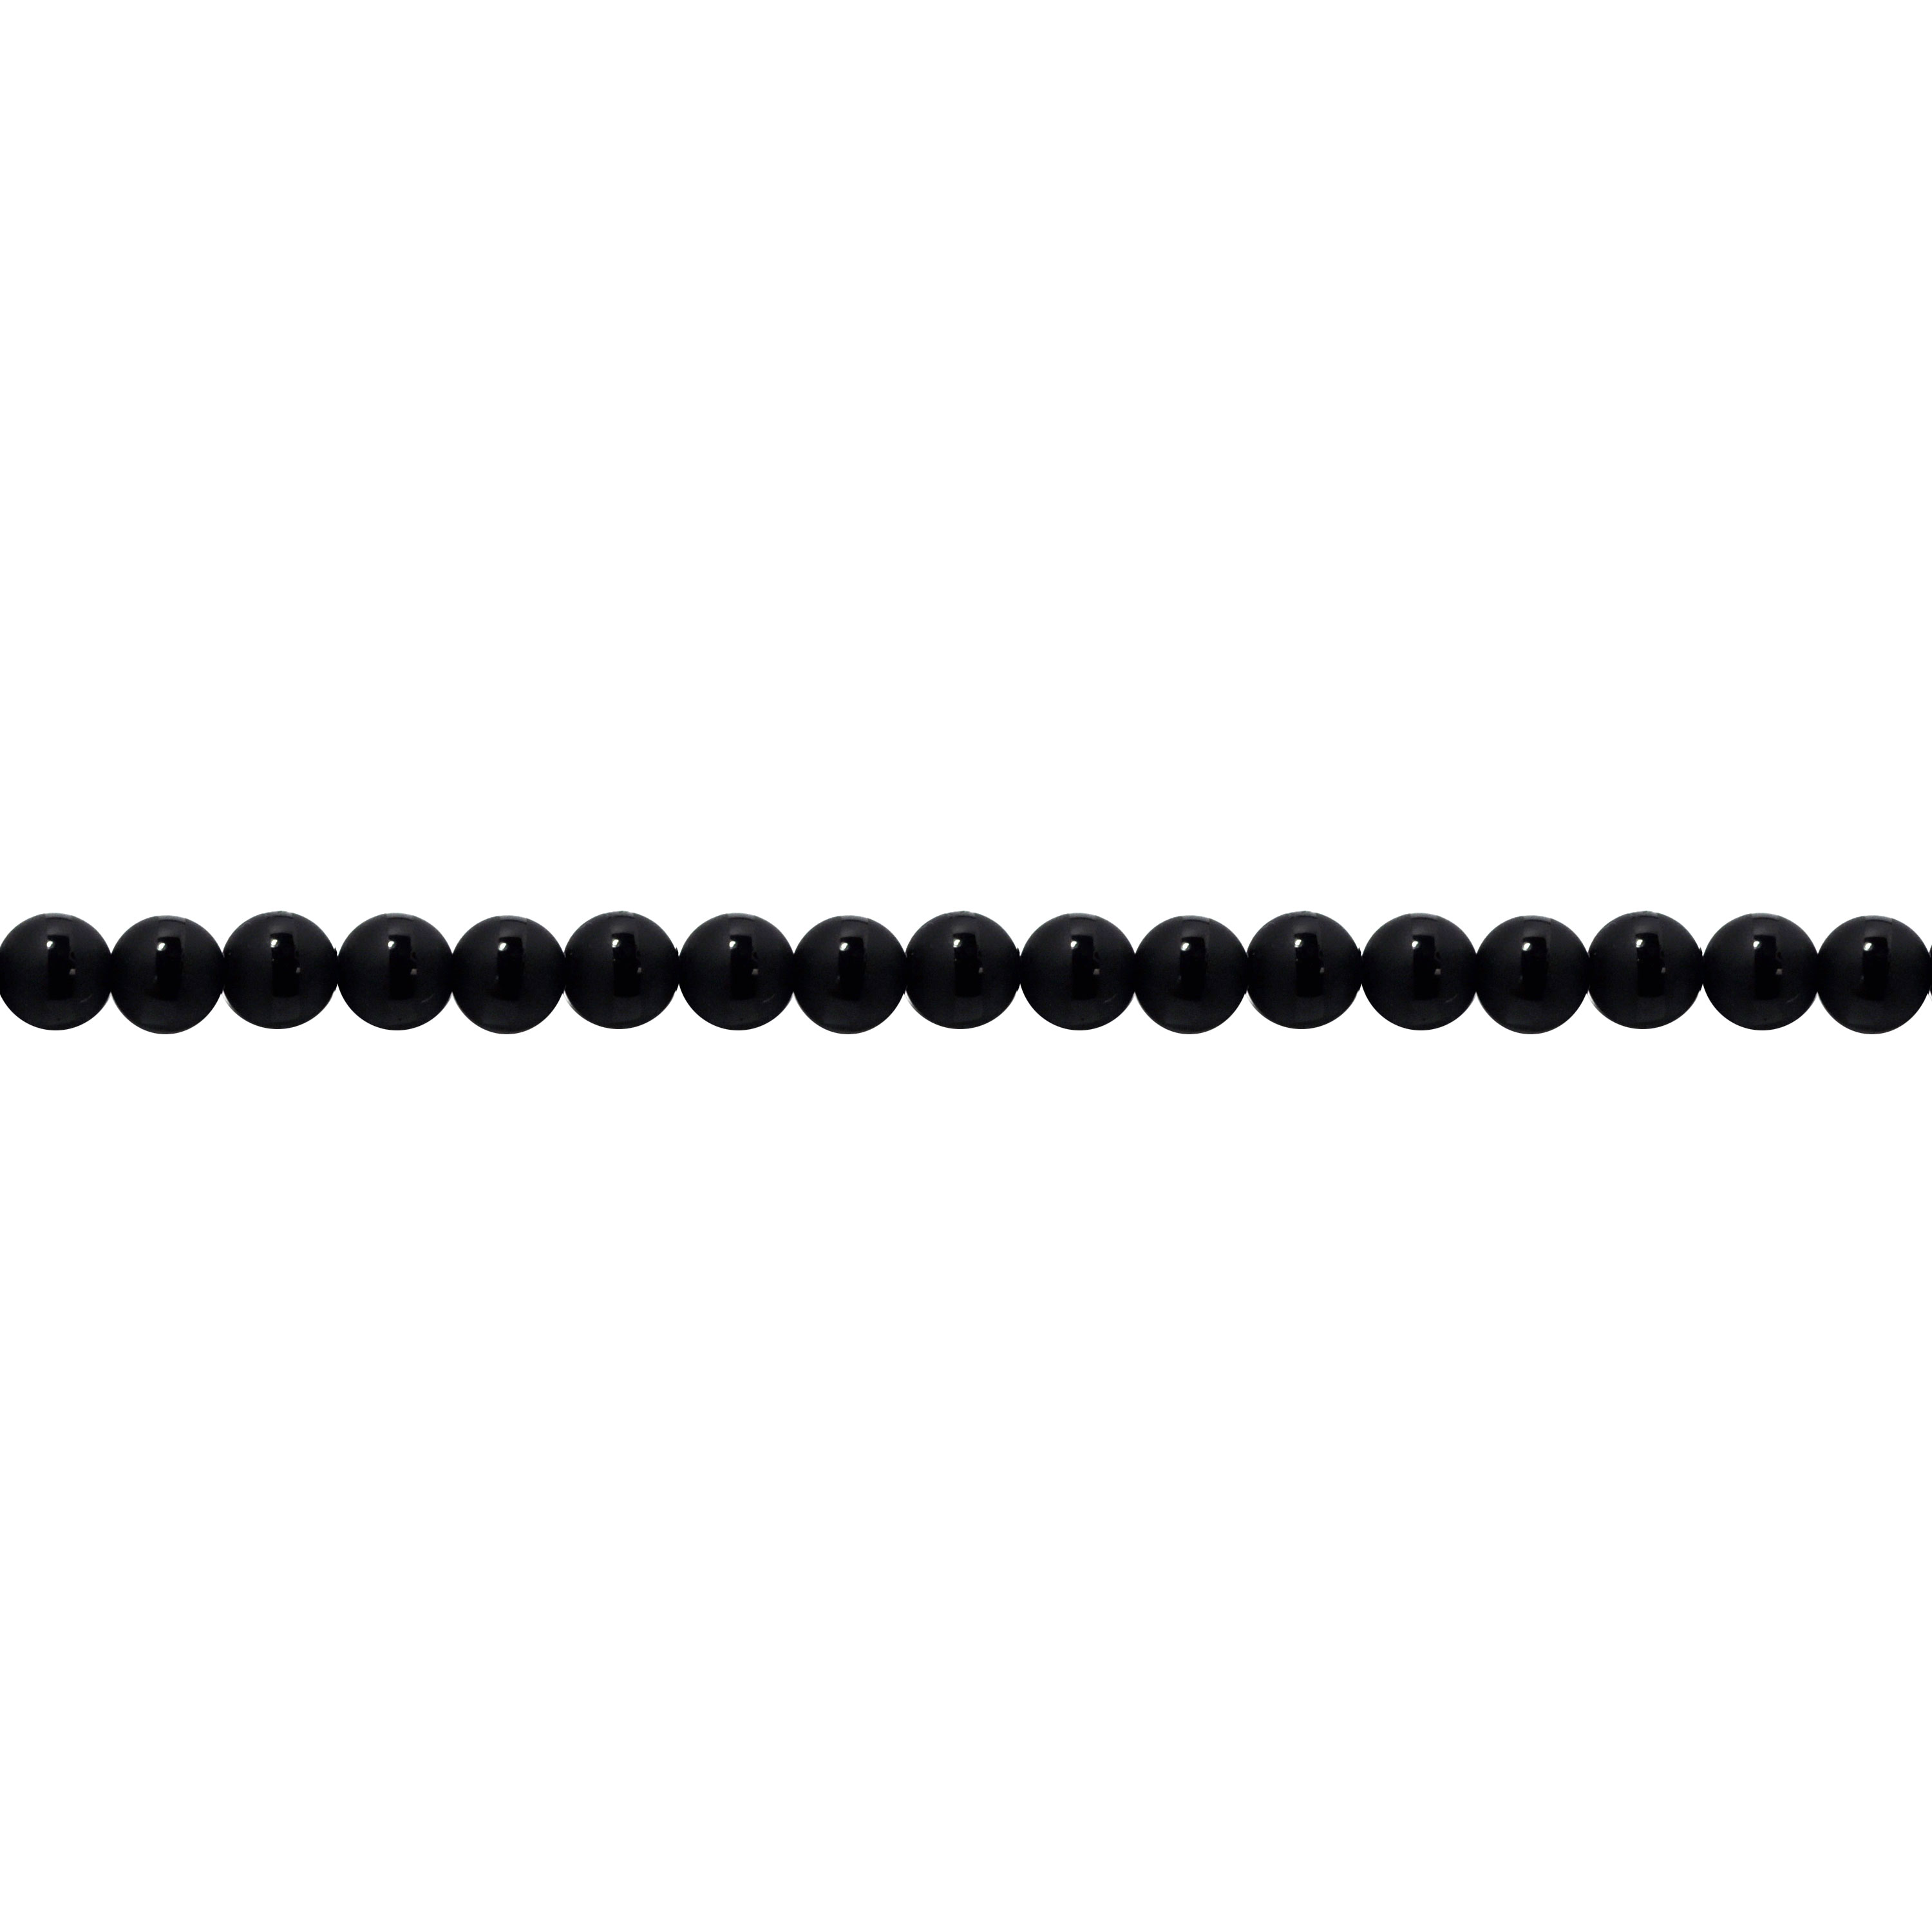 6mm Striped Black Frosted Black Onyx - Round